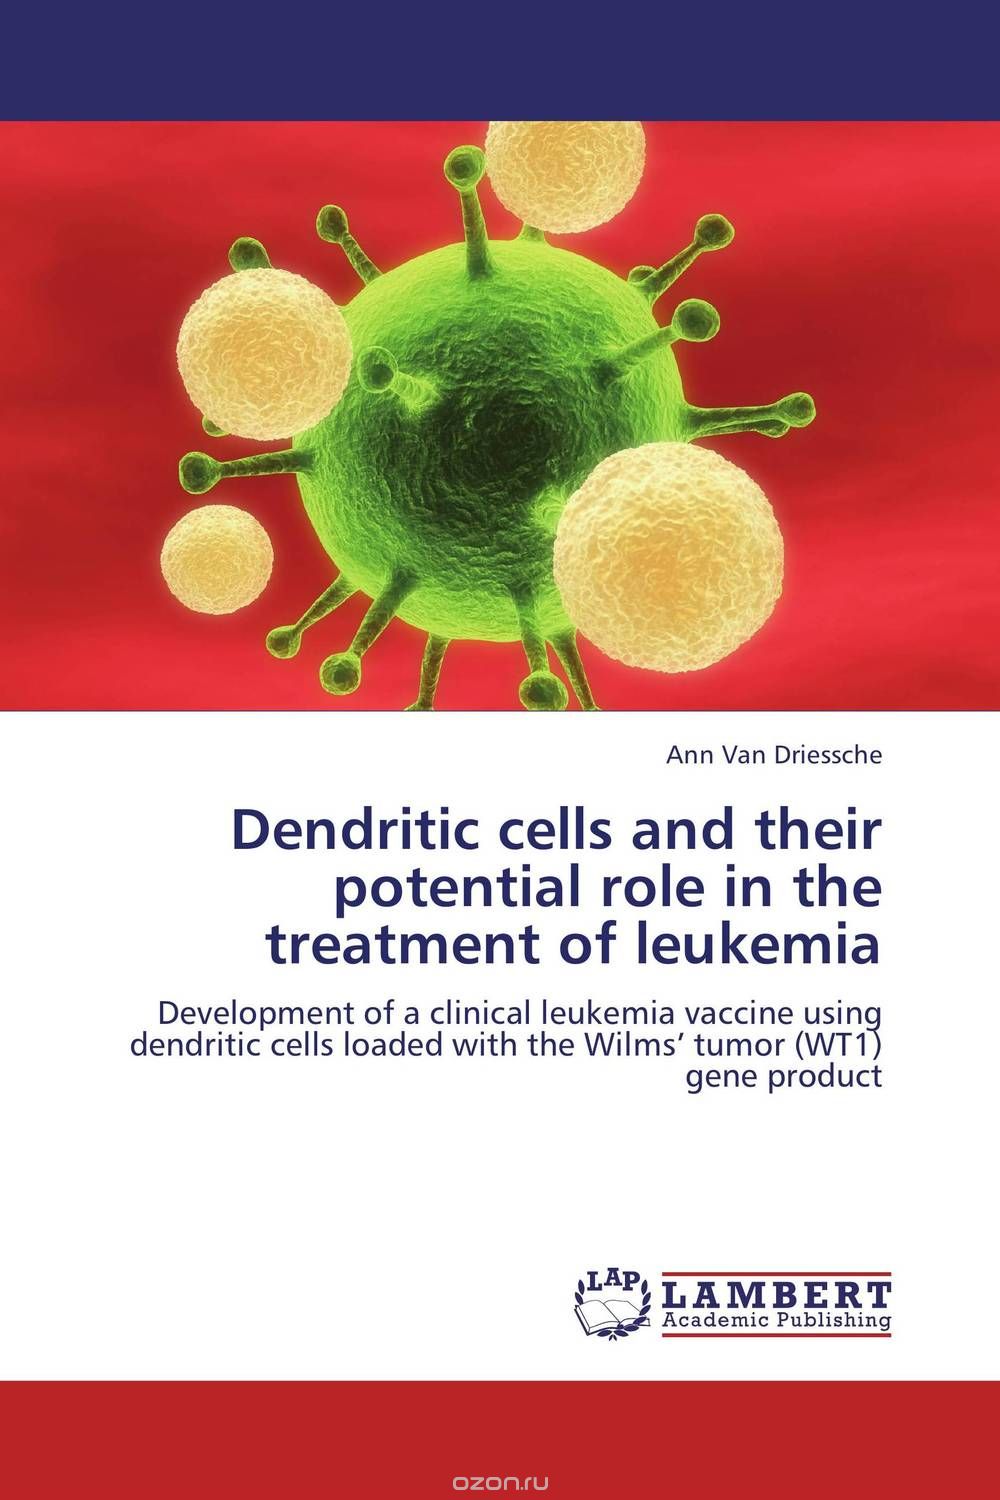 Dendritic cells and their potential role in the treatment of leukemia